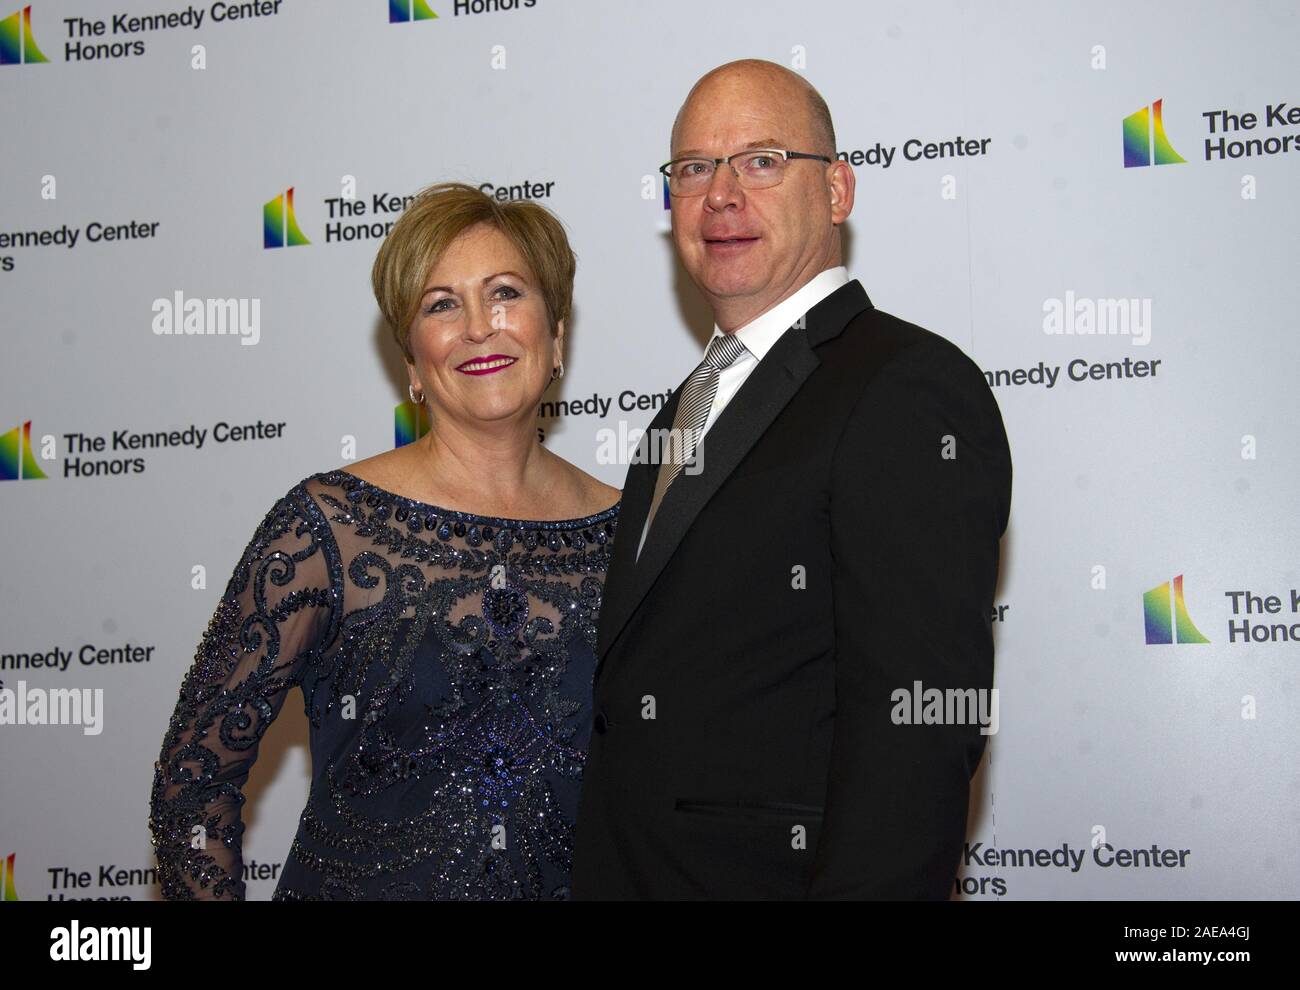 Washington, USA. 07th Dec, 2019. Deborah F. Rutter, President of the John F. Kennedy Center for the Performing Arts, and her husband, Peter Ellefson arrive for the formal Artist's Dinner honoring the recipients of the 42nd Annual Kennedy Center Honors at the USA Department of State in Washington, DC on Saturday, December 7, 2019. The 2019 honorees are: Earth, Wind & Fire, Sally Field, Linda Ronstadt, Sesame Street, and Michael Tilson Thomas.Credit: Ron Sachs/Pool via CNP Credit: UPI/Alamy Live News Stock Photo